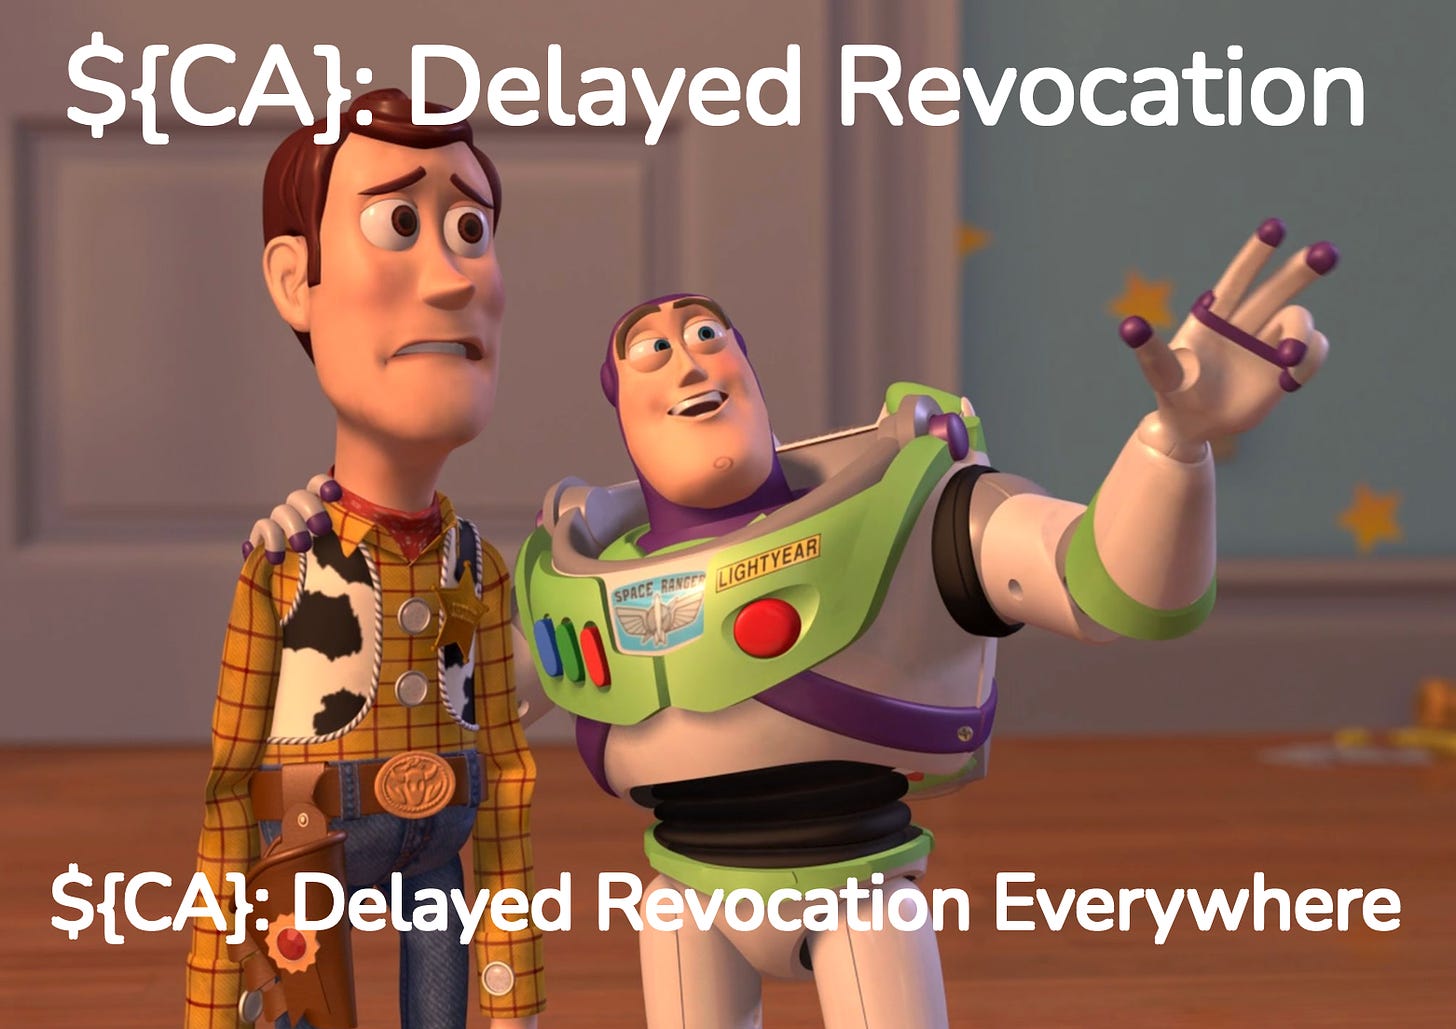 Buzz Lightyear with ${CA}: Delayed Revocation, ${CA}: Delayed Revocation Everywhere meme